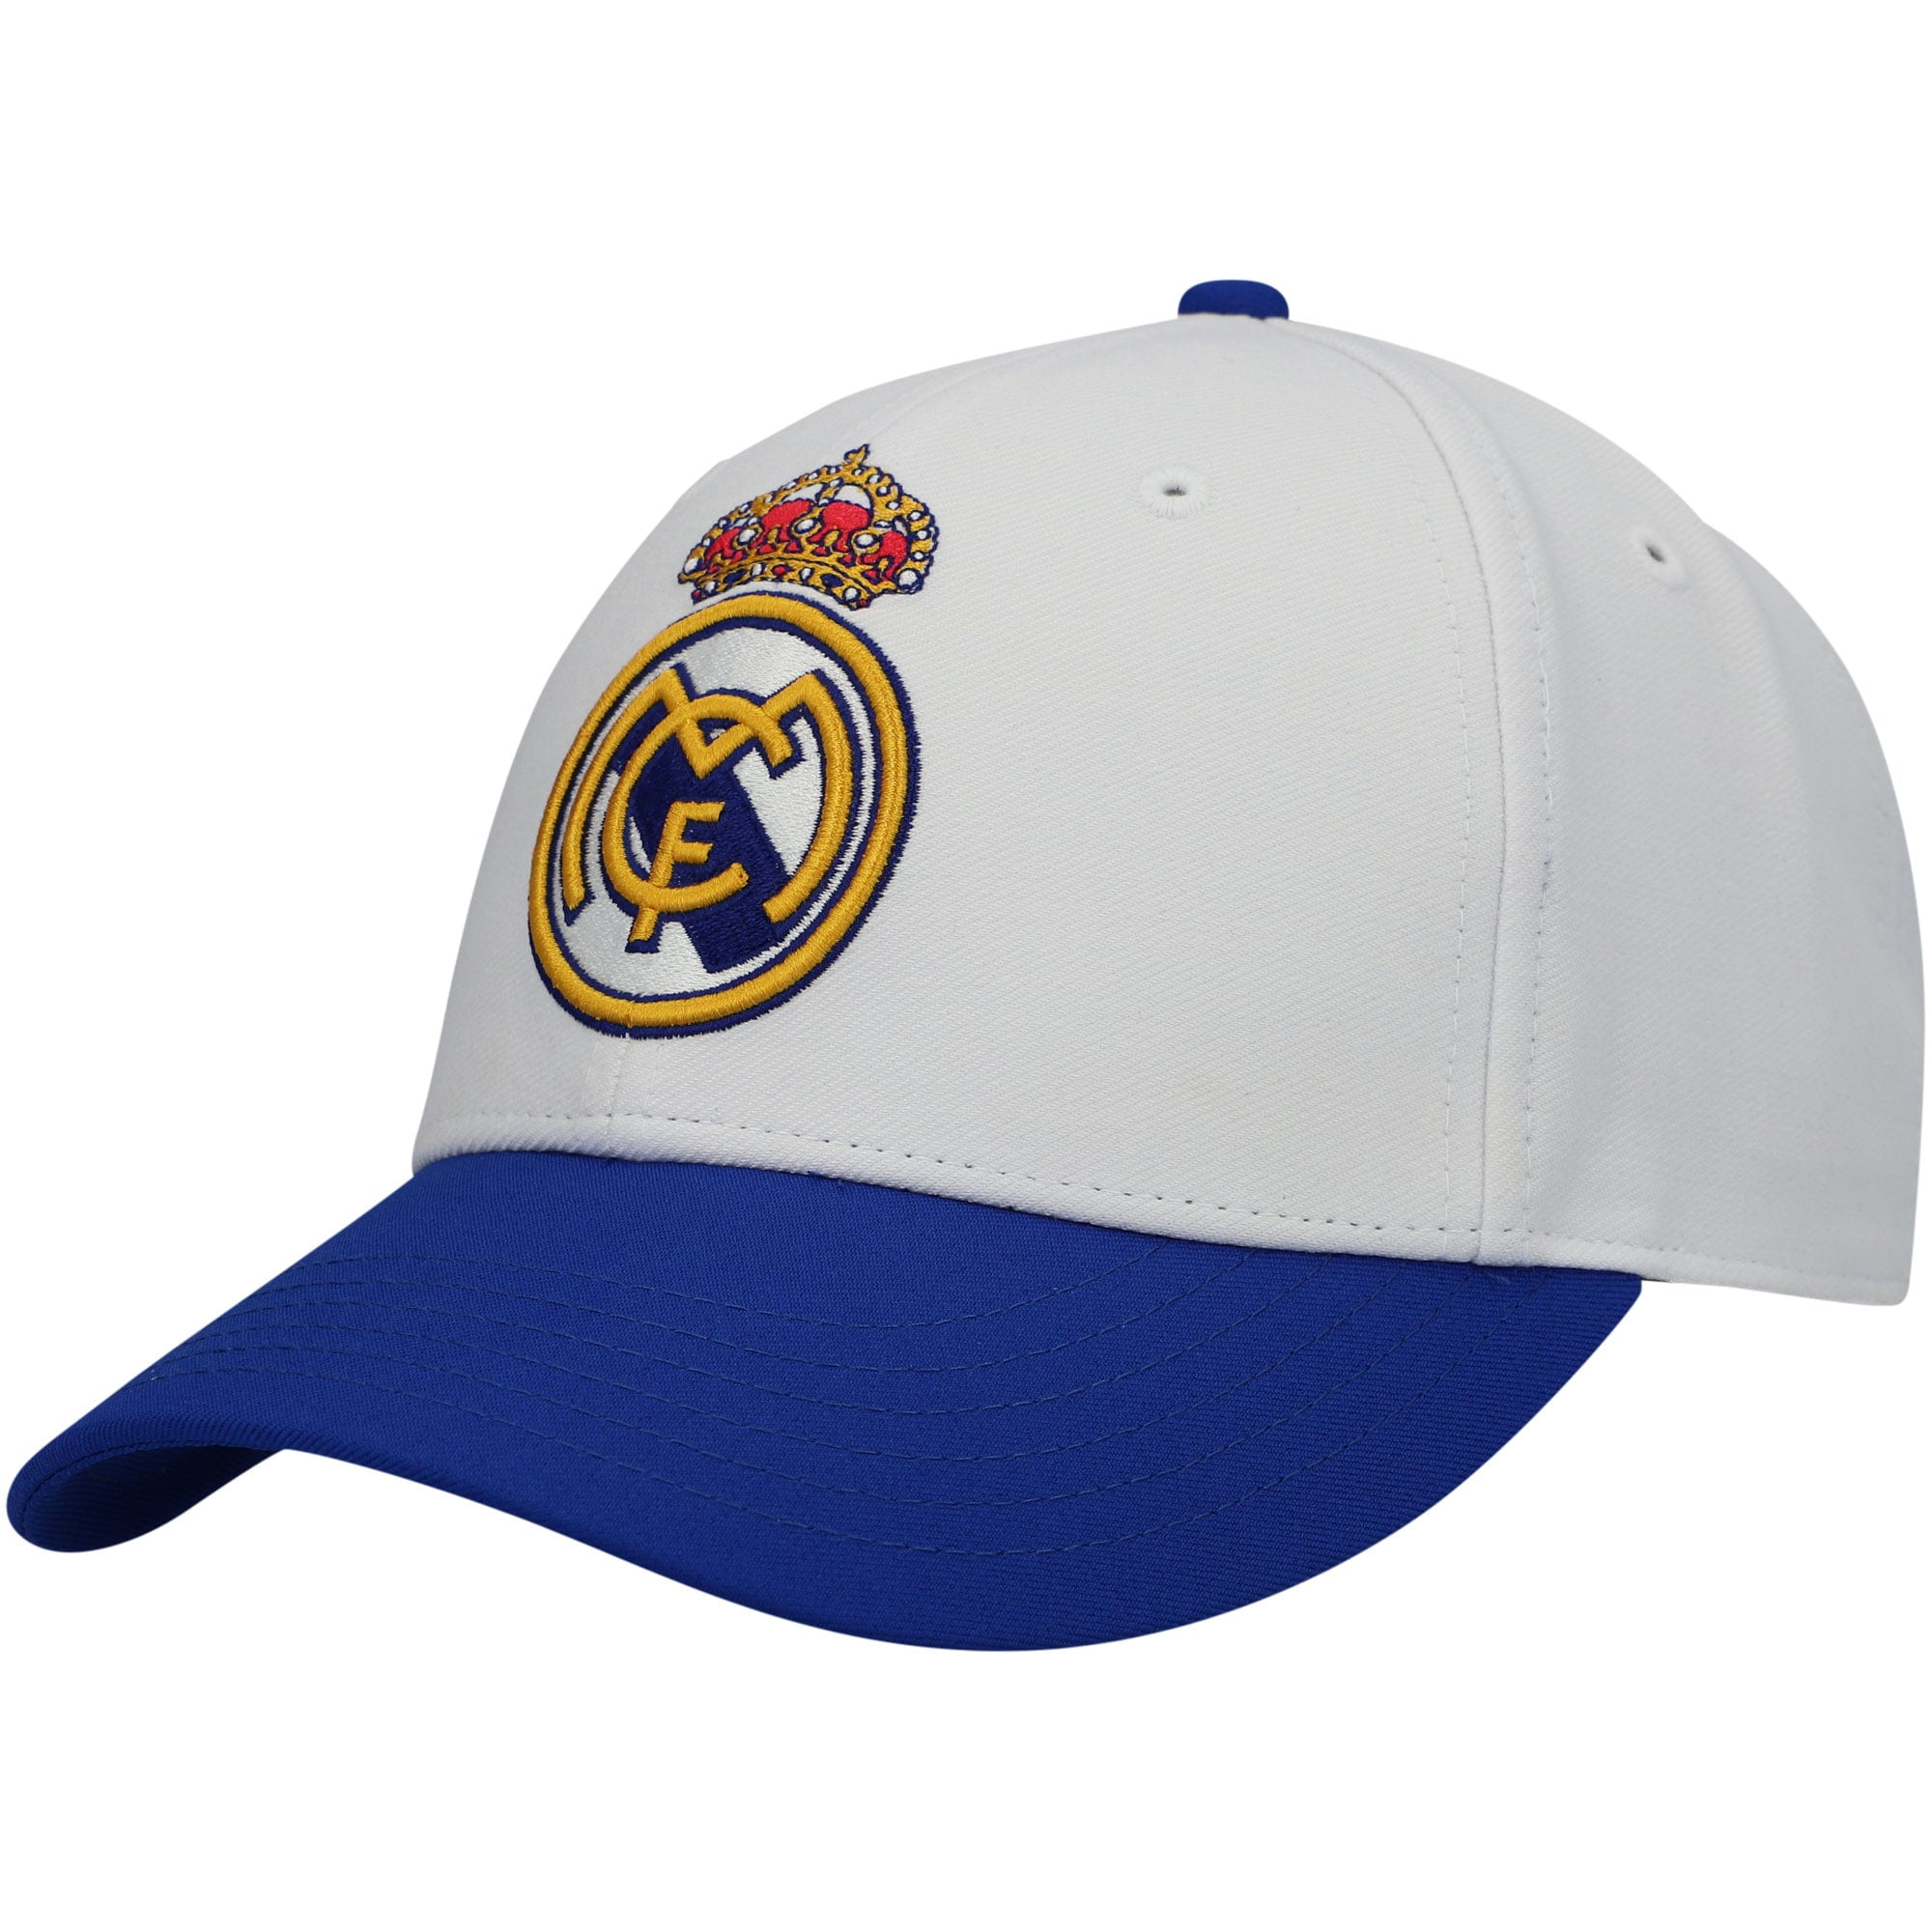 Fan Ink Real Madrid Soft Touch Adjustable Snapback Hat/Cap Grey/Blue